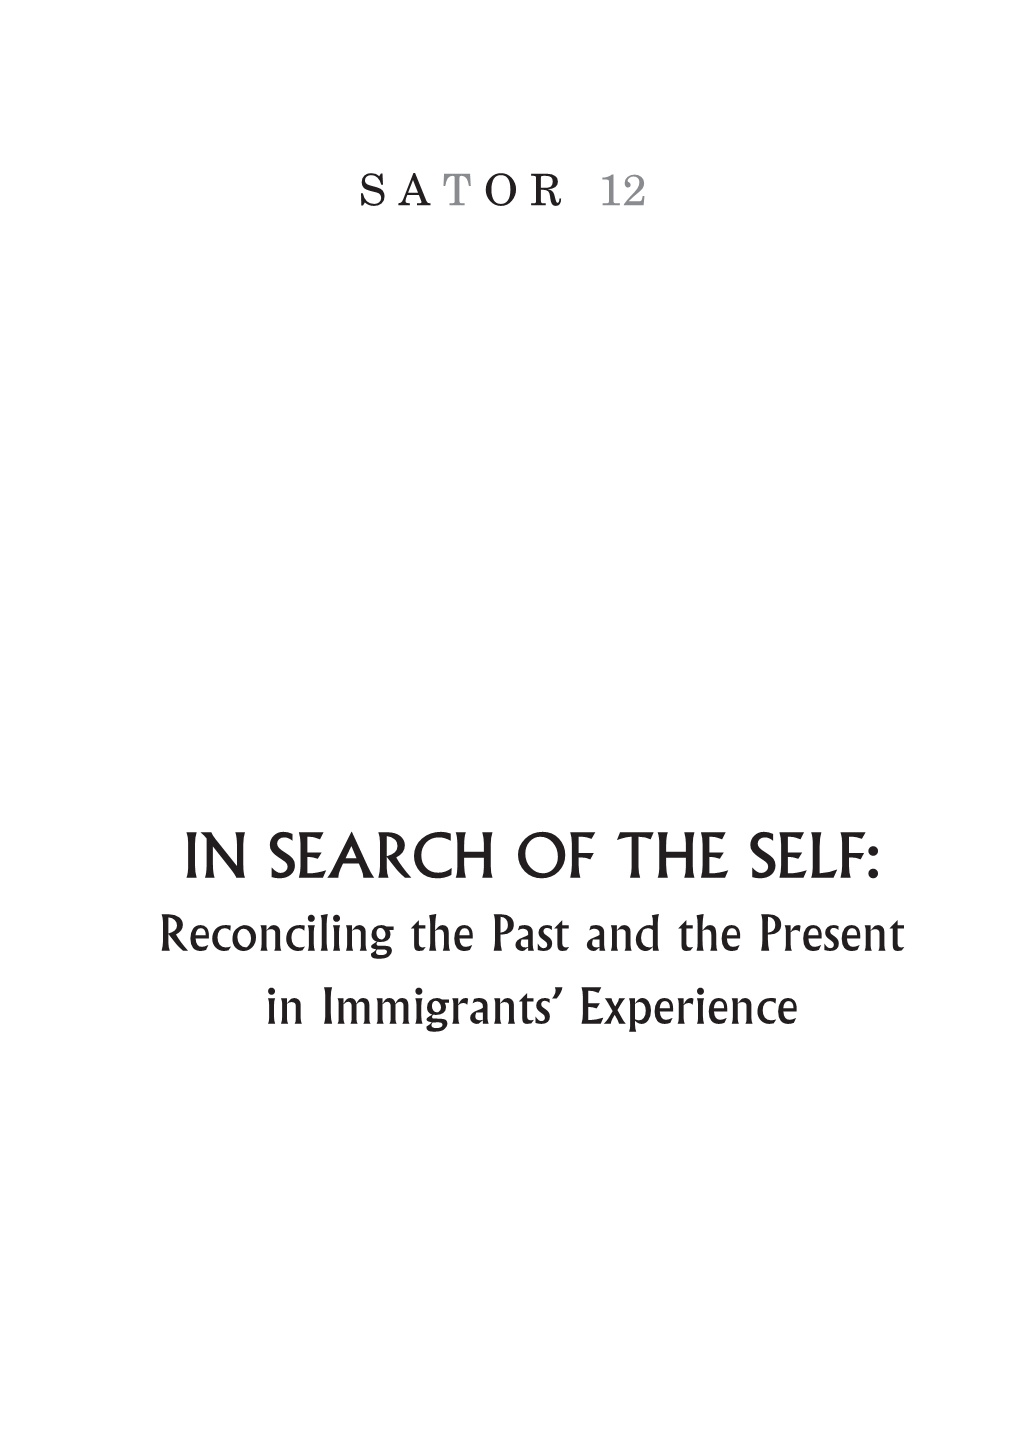 In Search of the Self: Reconciling the Past and the Present in Immigrants’ Experience S a T O R 12 ELM Scholarly Press